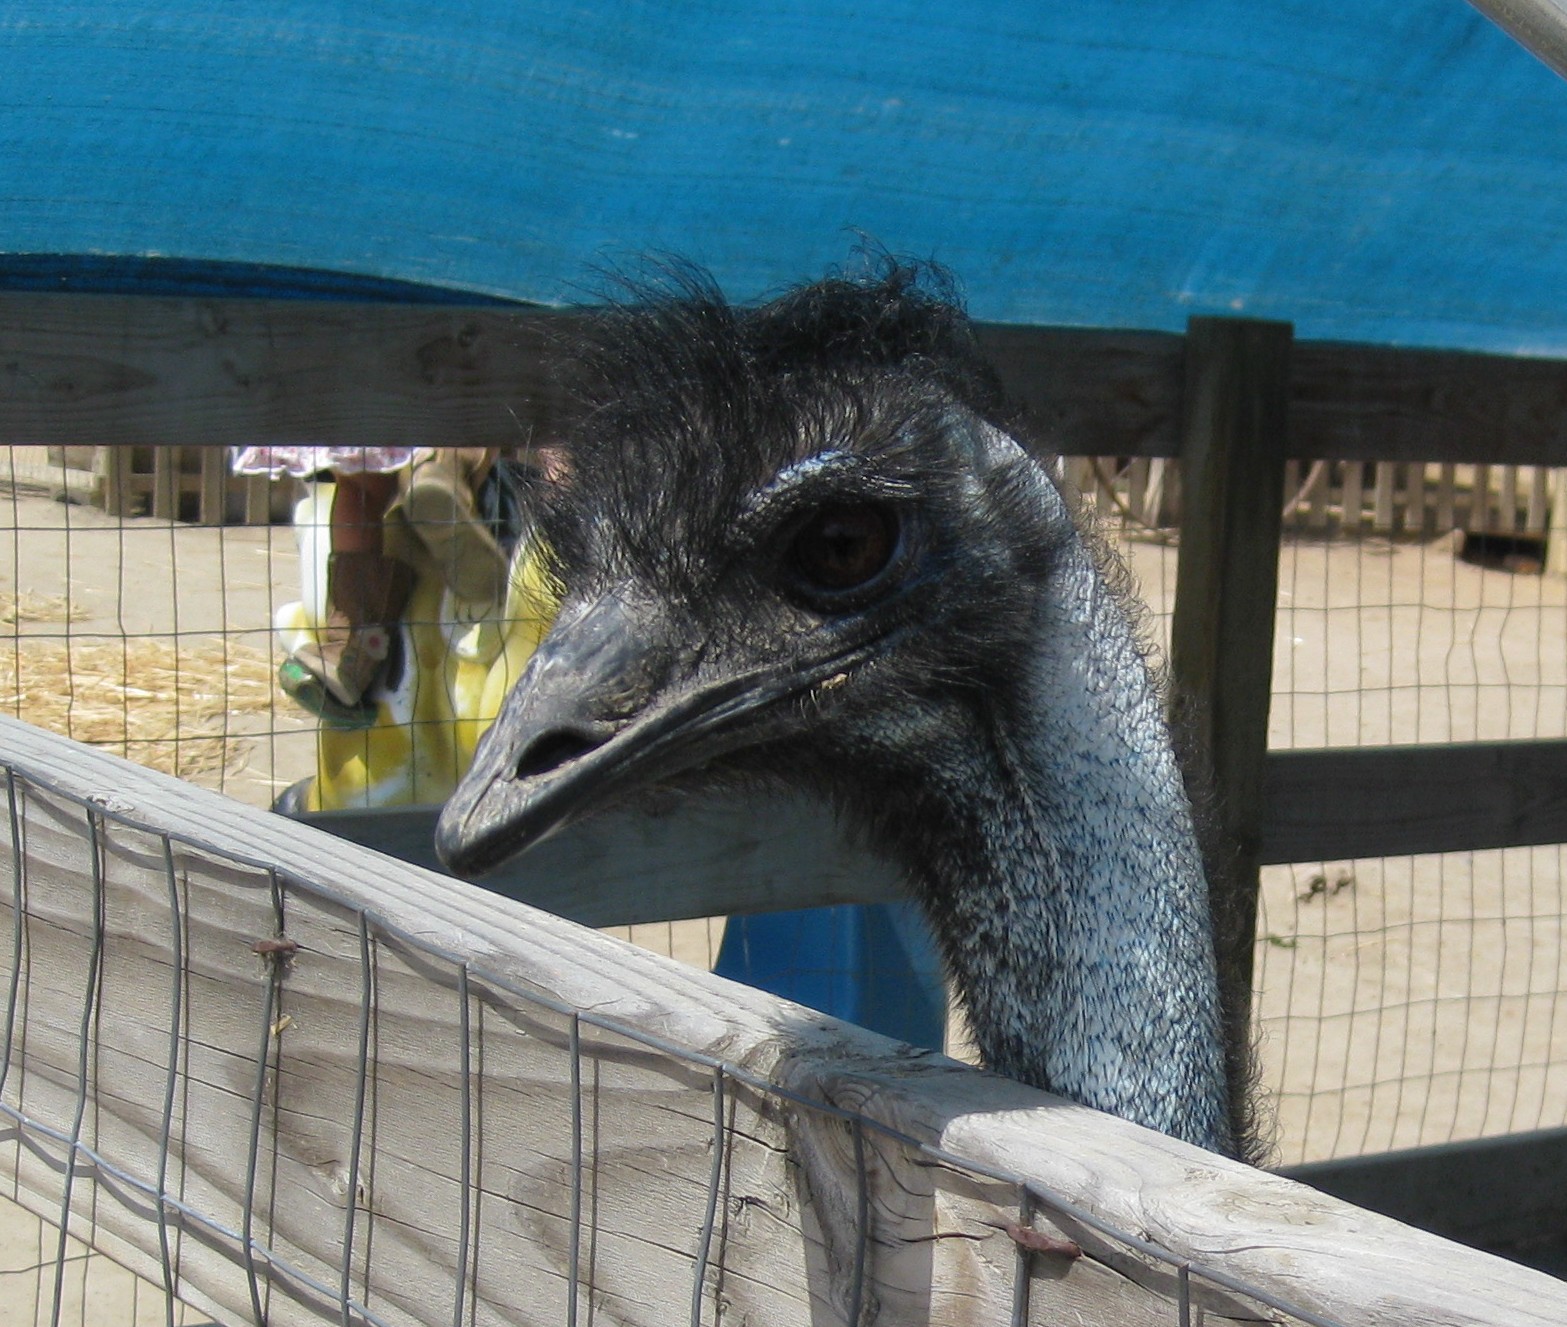 A hungry Ostrich